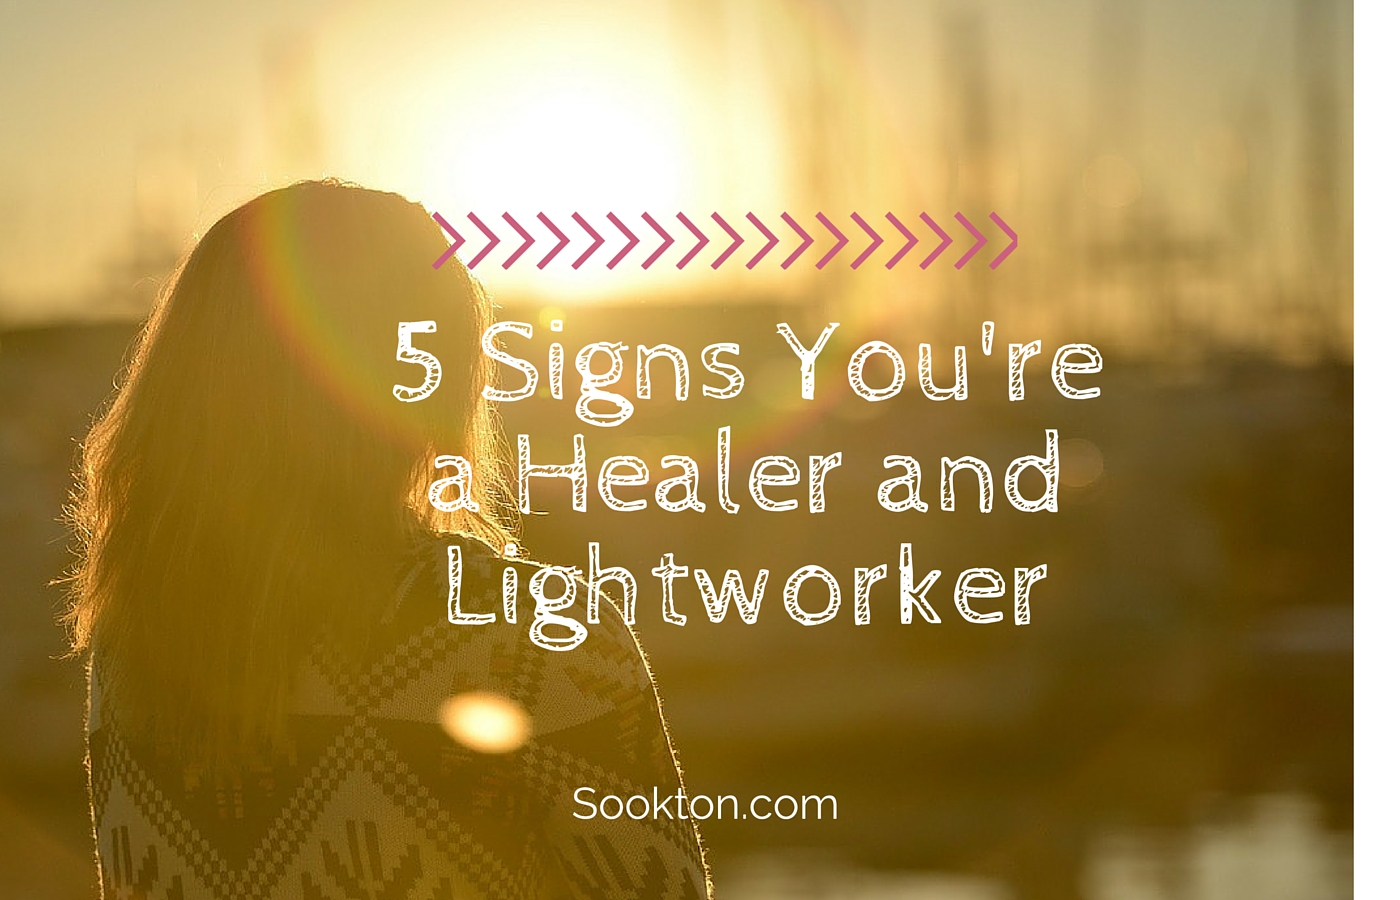 5 Signs You’re a Healer and Lightworker